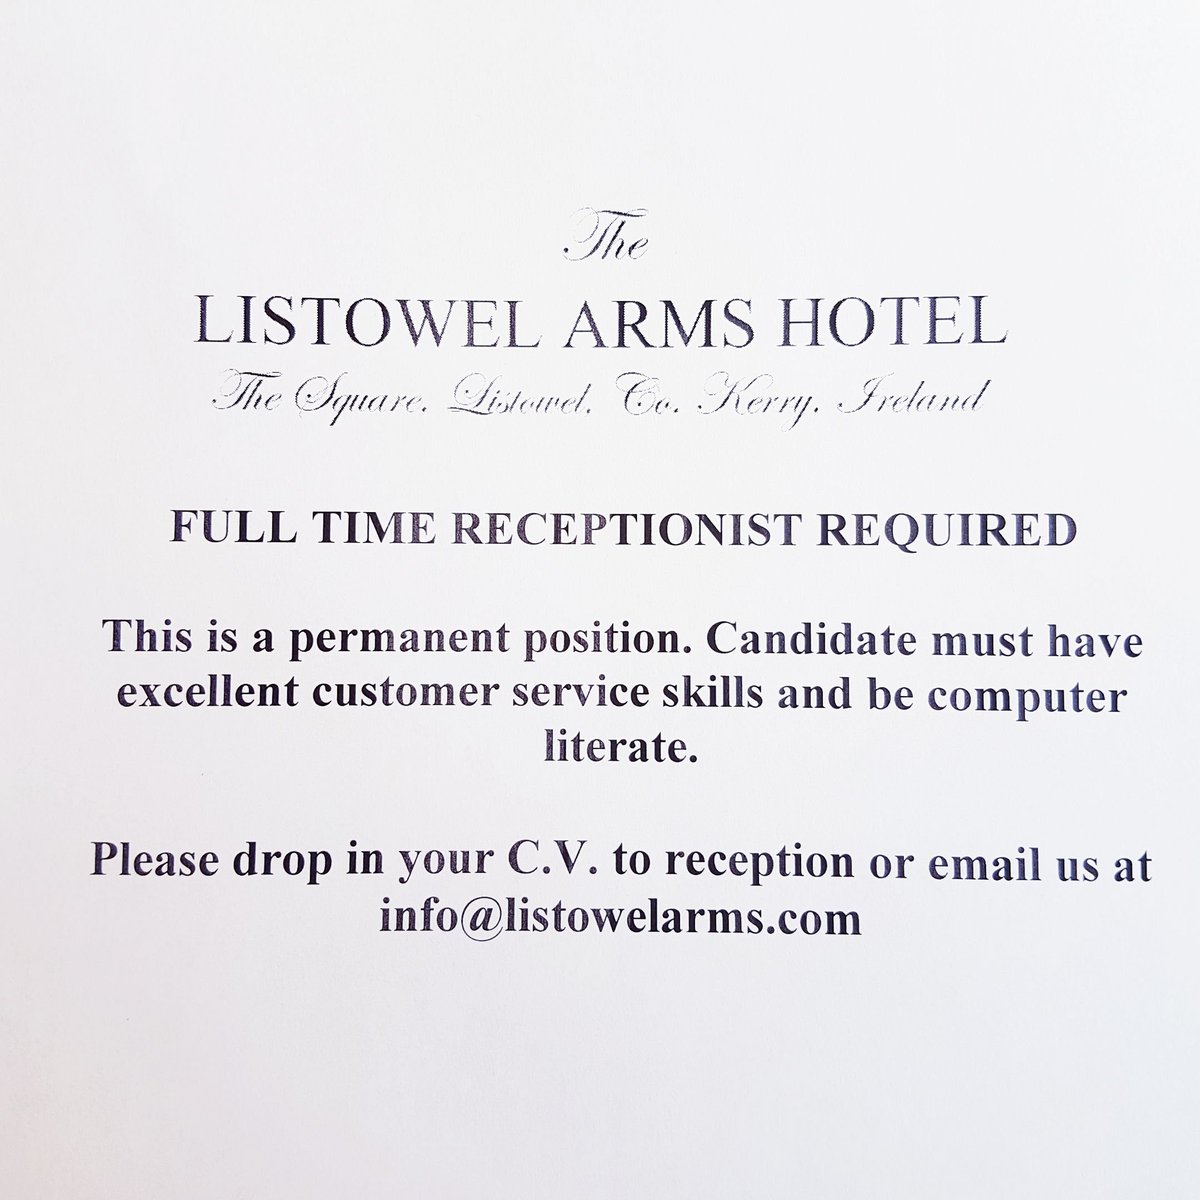 Full time receptionist required. Please email info@listowelarms.com or call 068 21500 for more info. 
@nkerrycollege @kerryjobfairy @JobsinIreland @LimerickJobs @irishjobfairy @SPINSouthWest @radiokerry